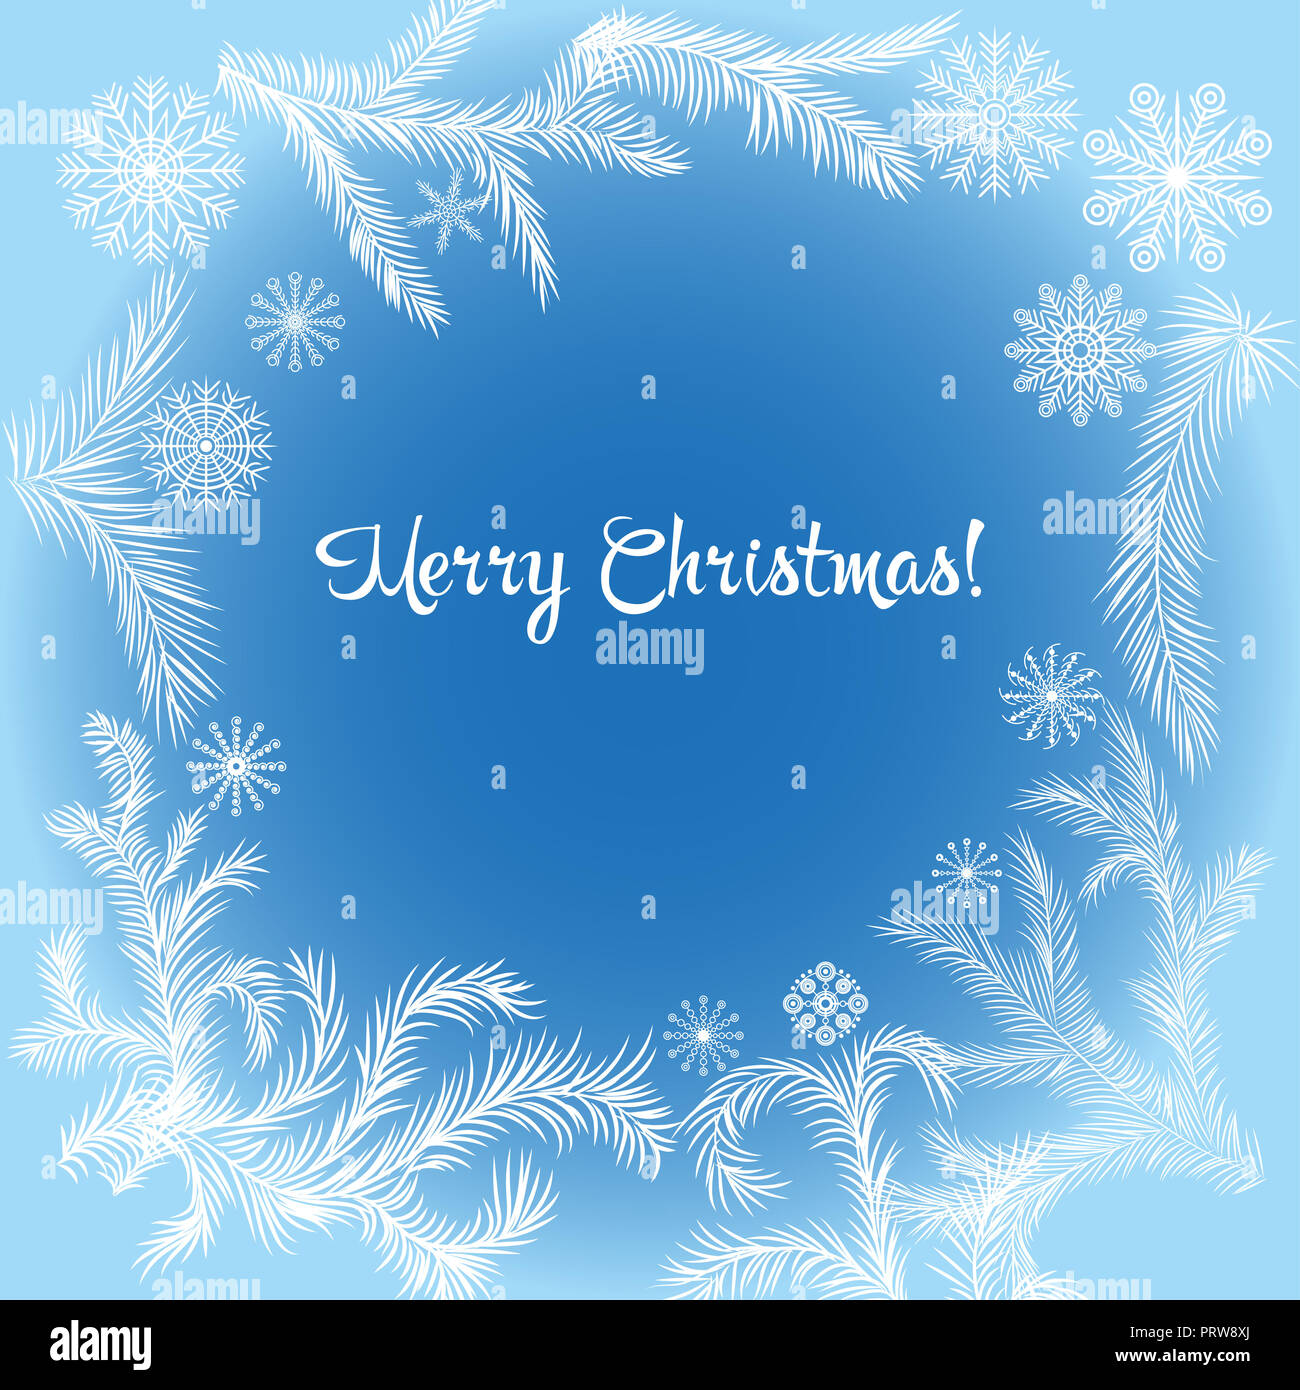 Abstract design Christmas card illustration for text. Stock Photo